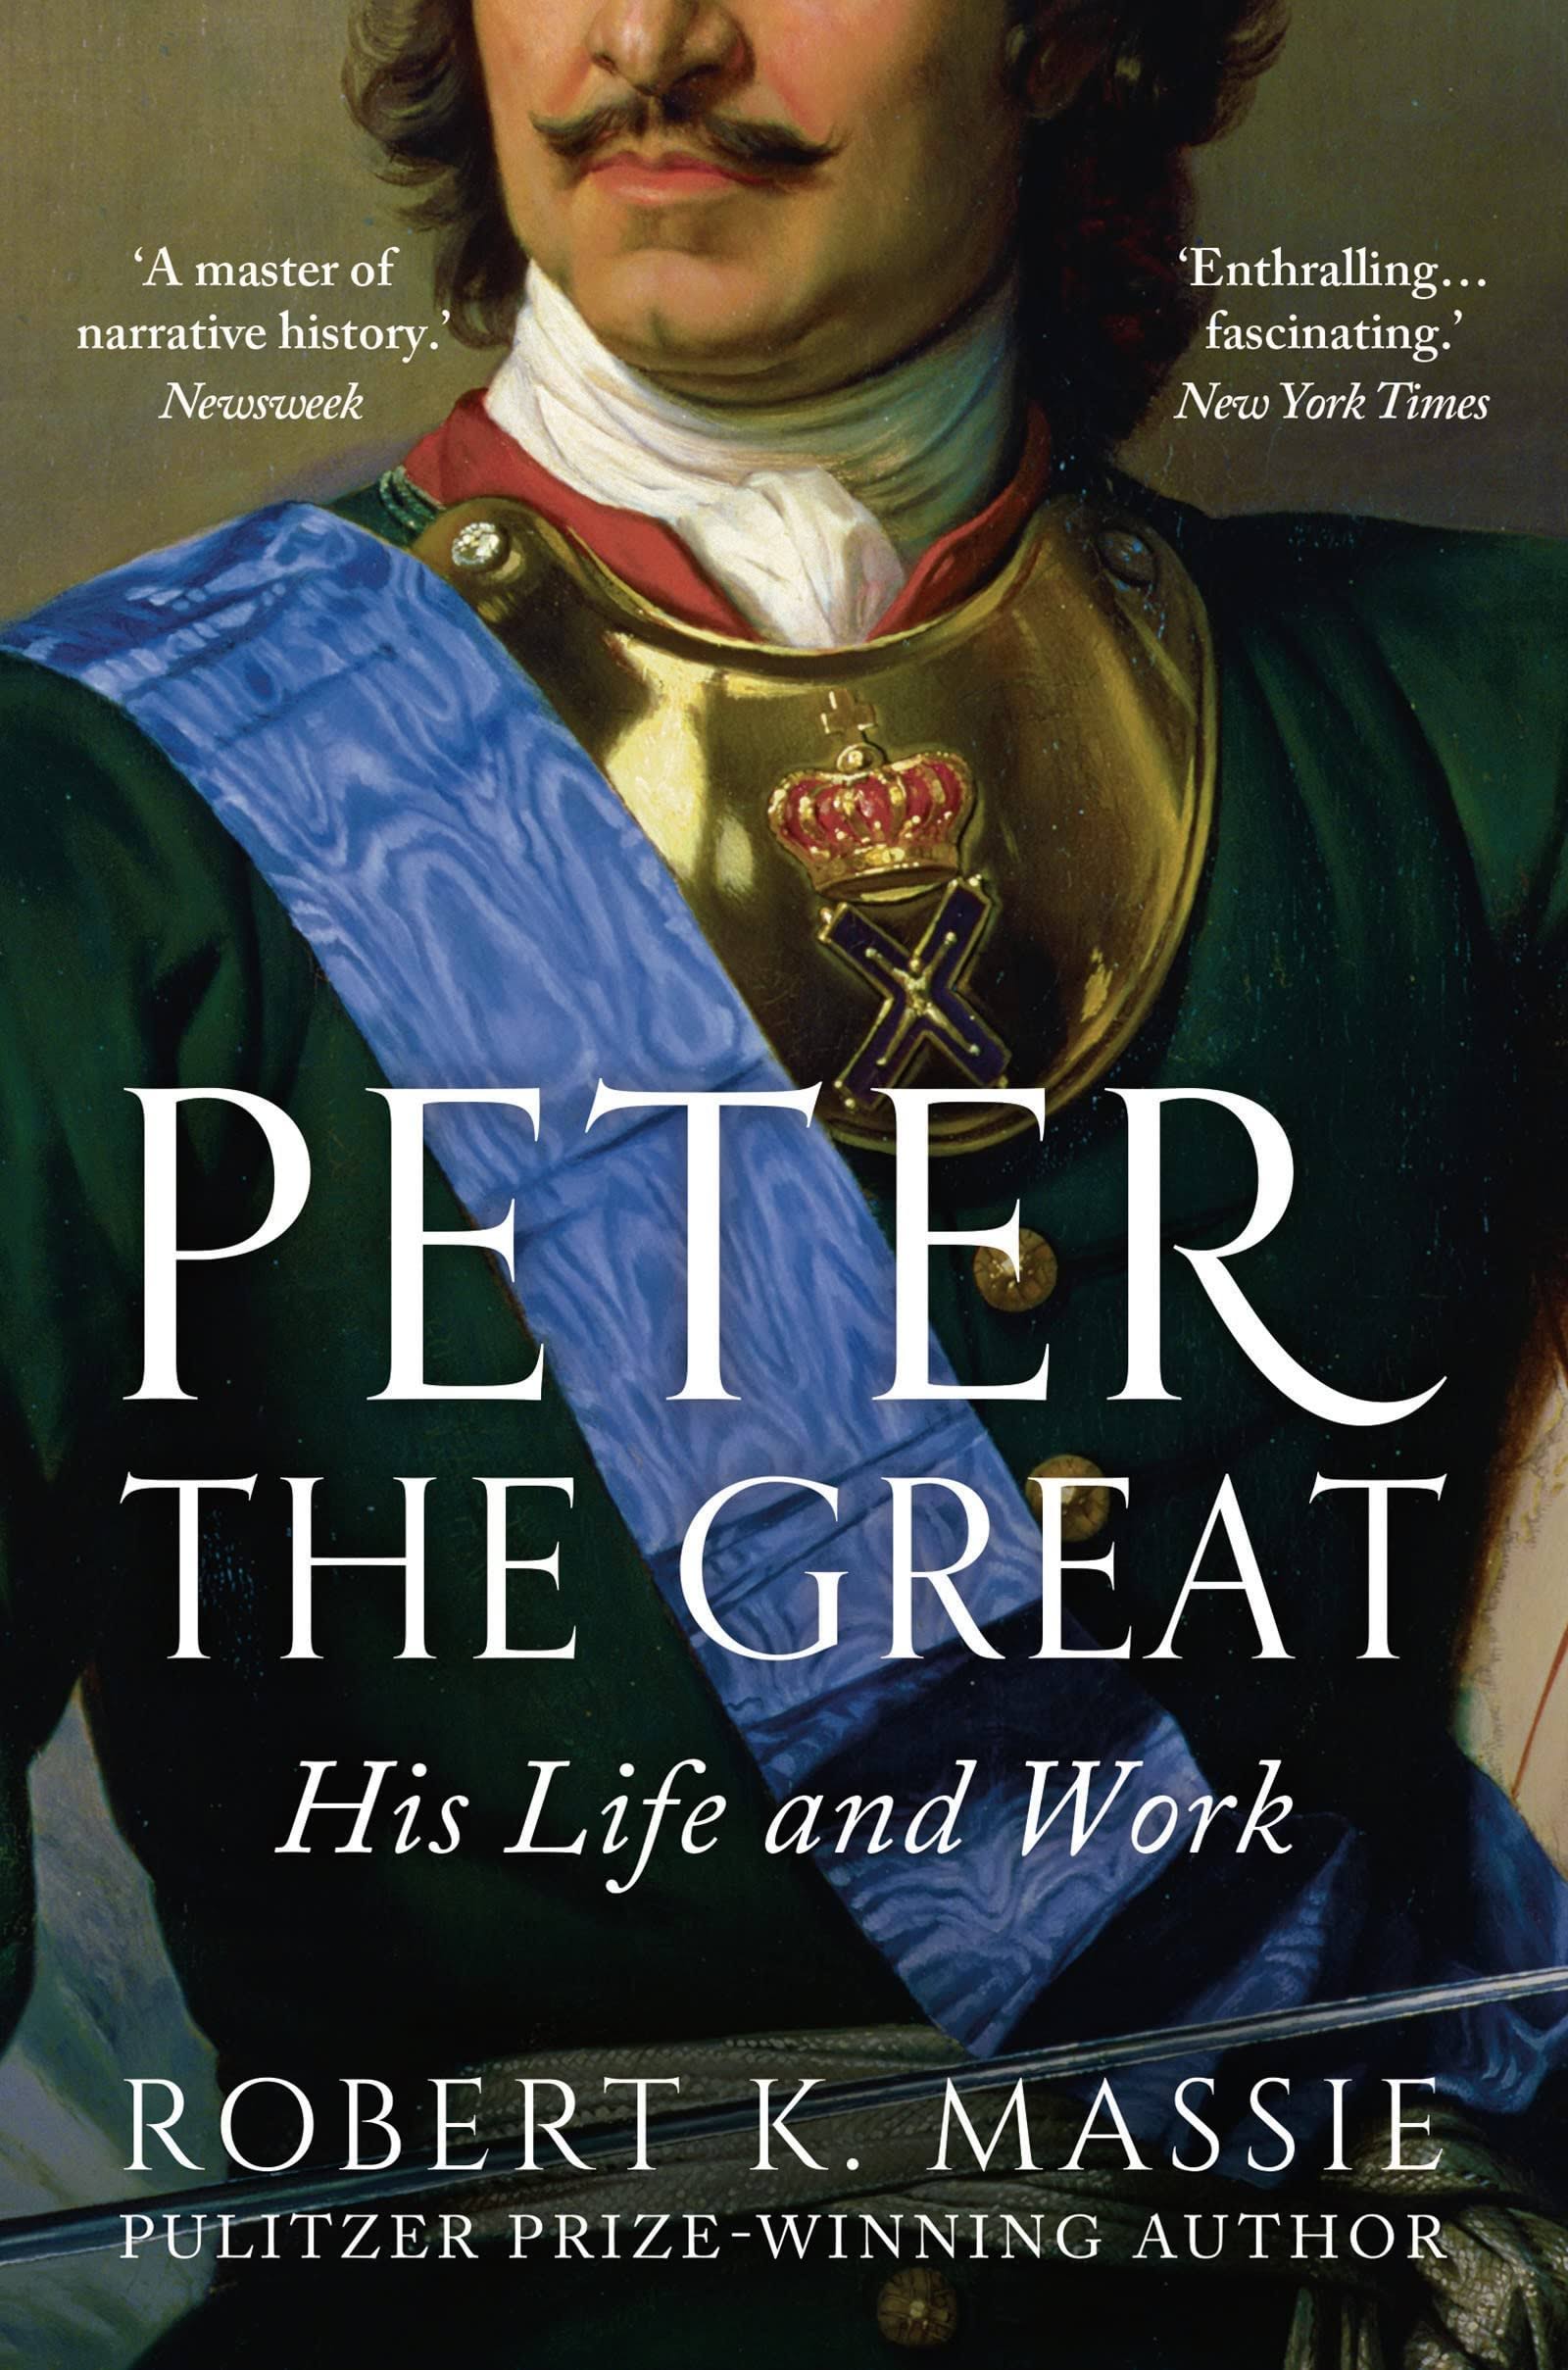 Peter the Great [Book]